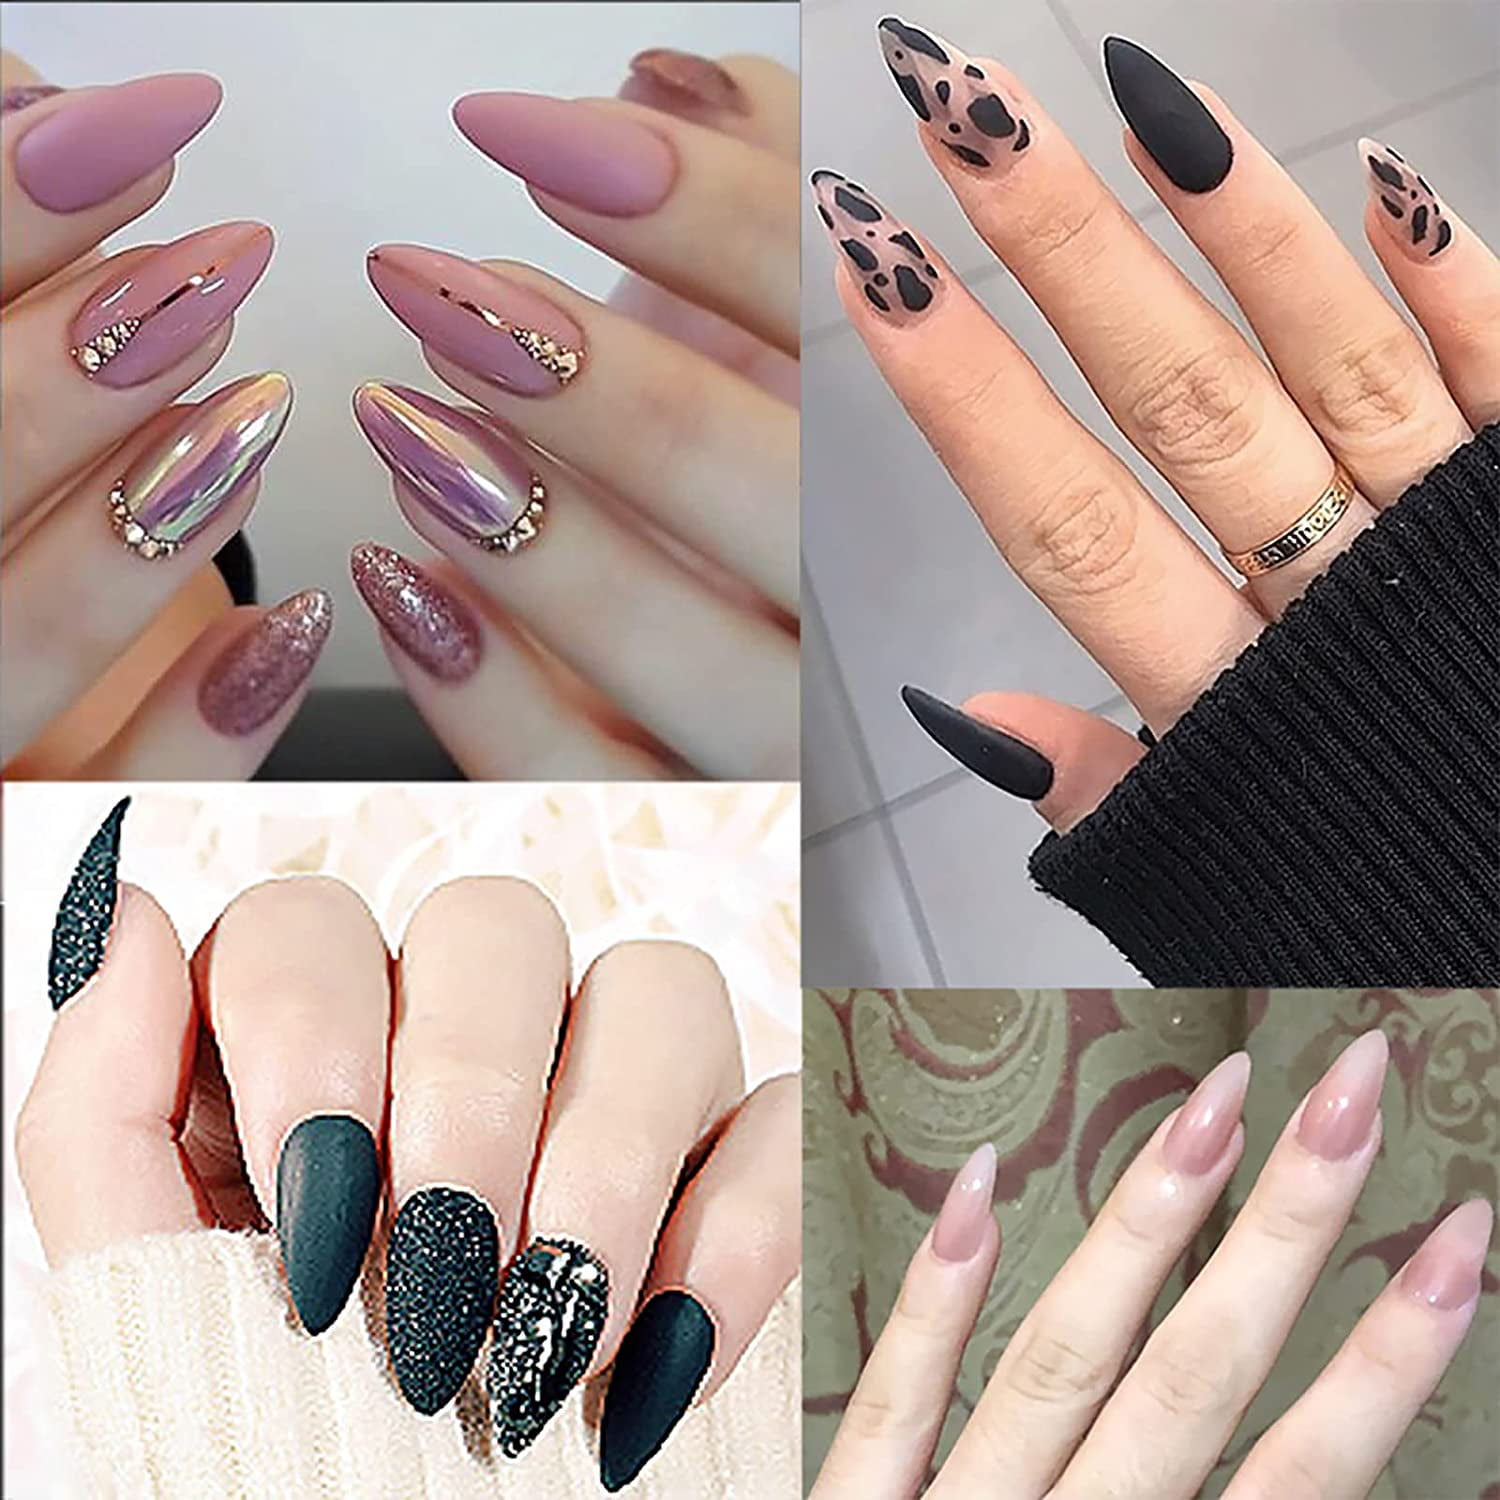 Best Almond Nail Designs to Screenshot Now